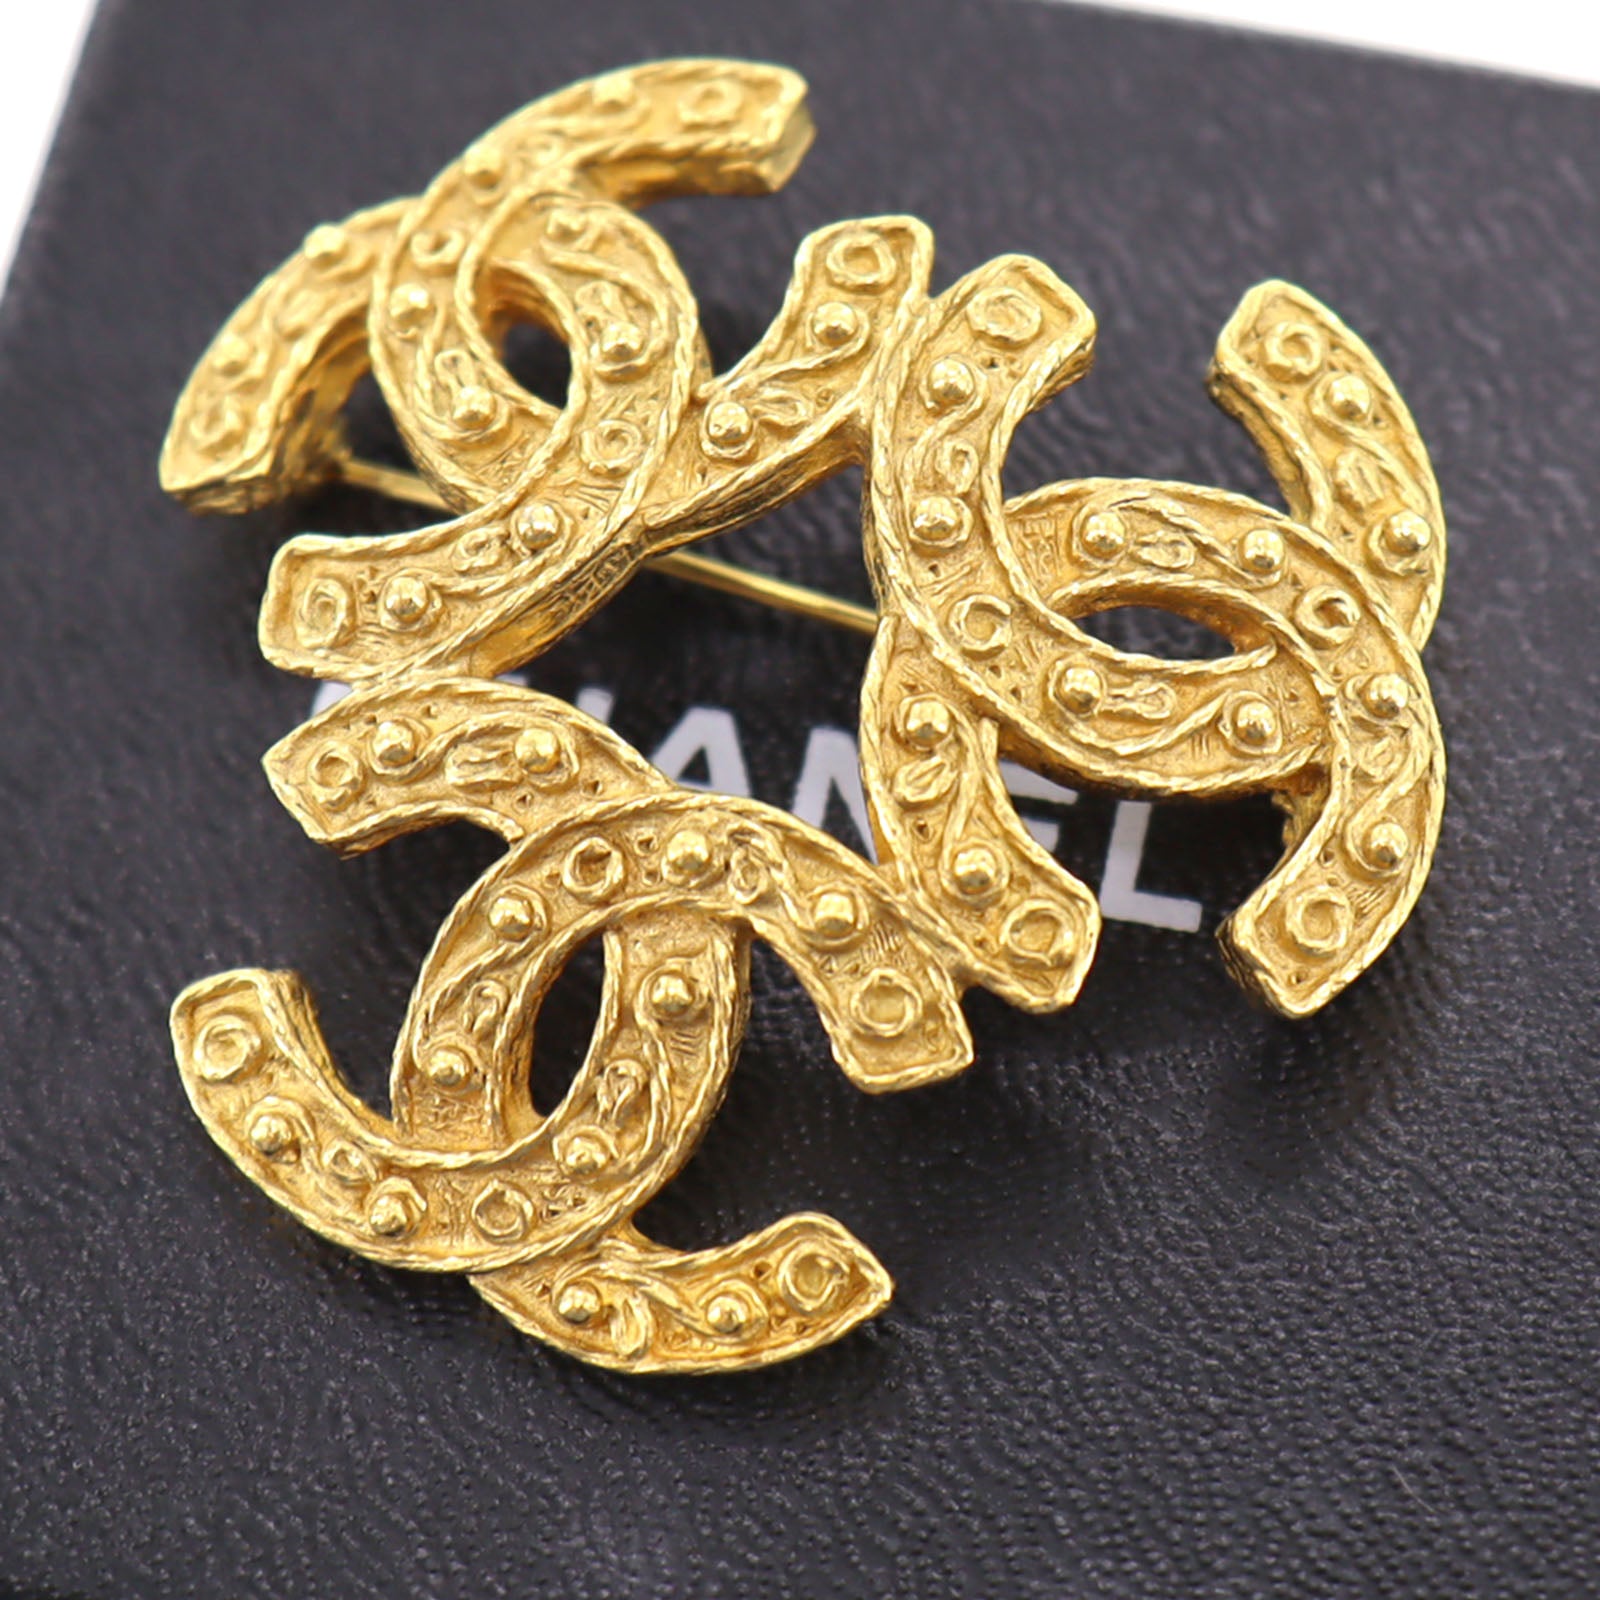 CHANEL CC Logos Used Pin Brooch Gold Plated France Authentic #AG190 Y